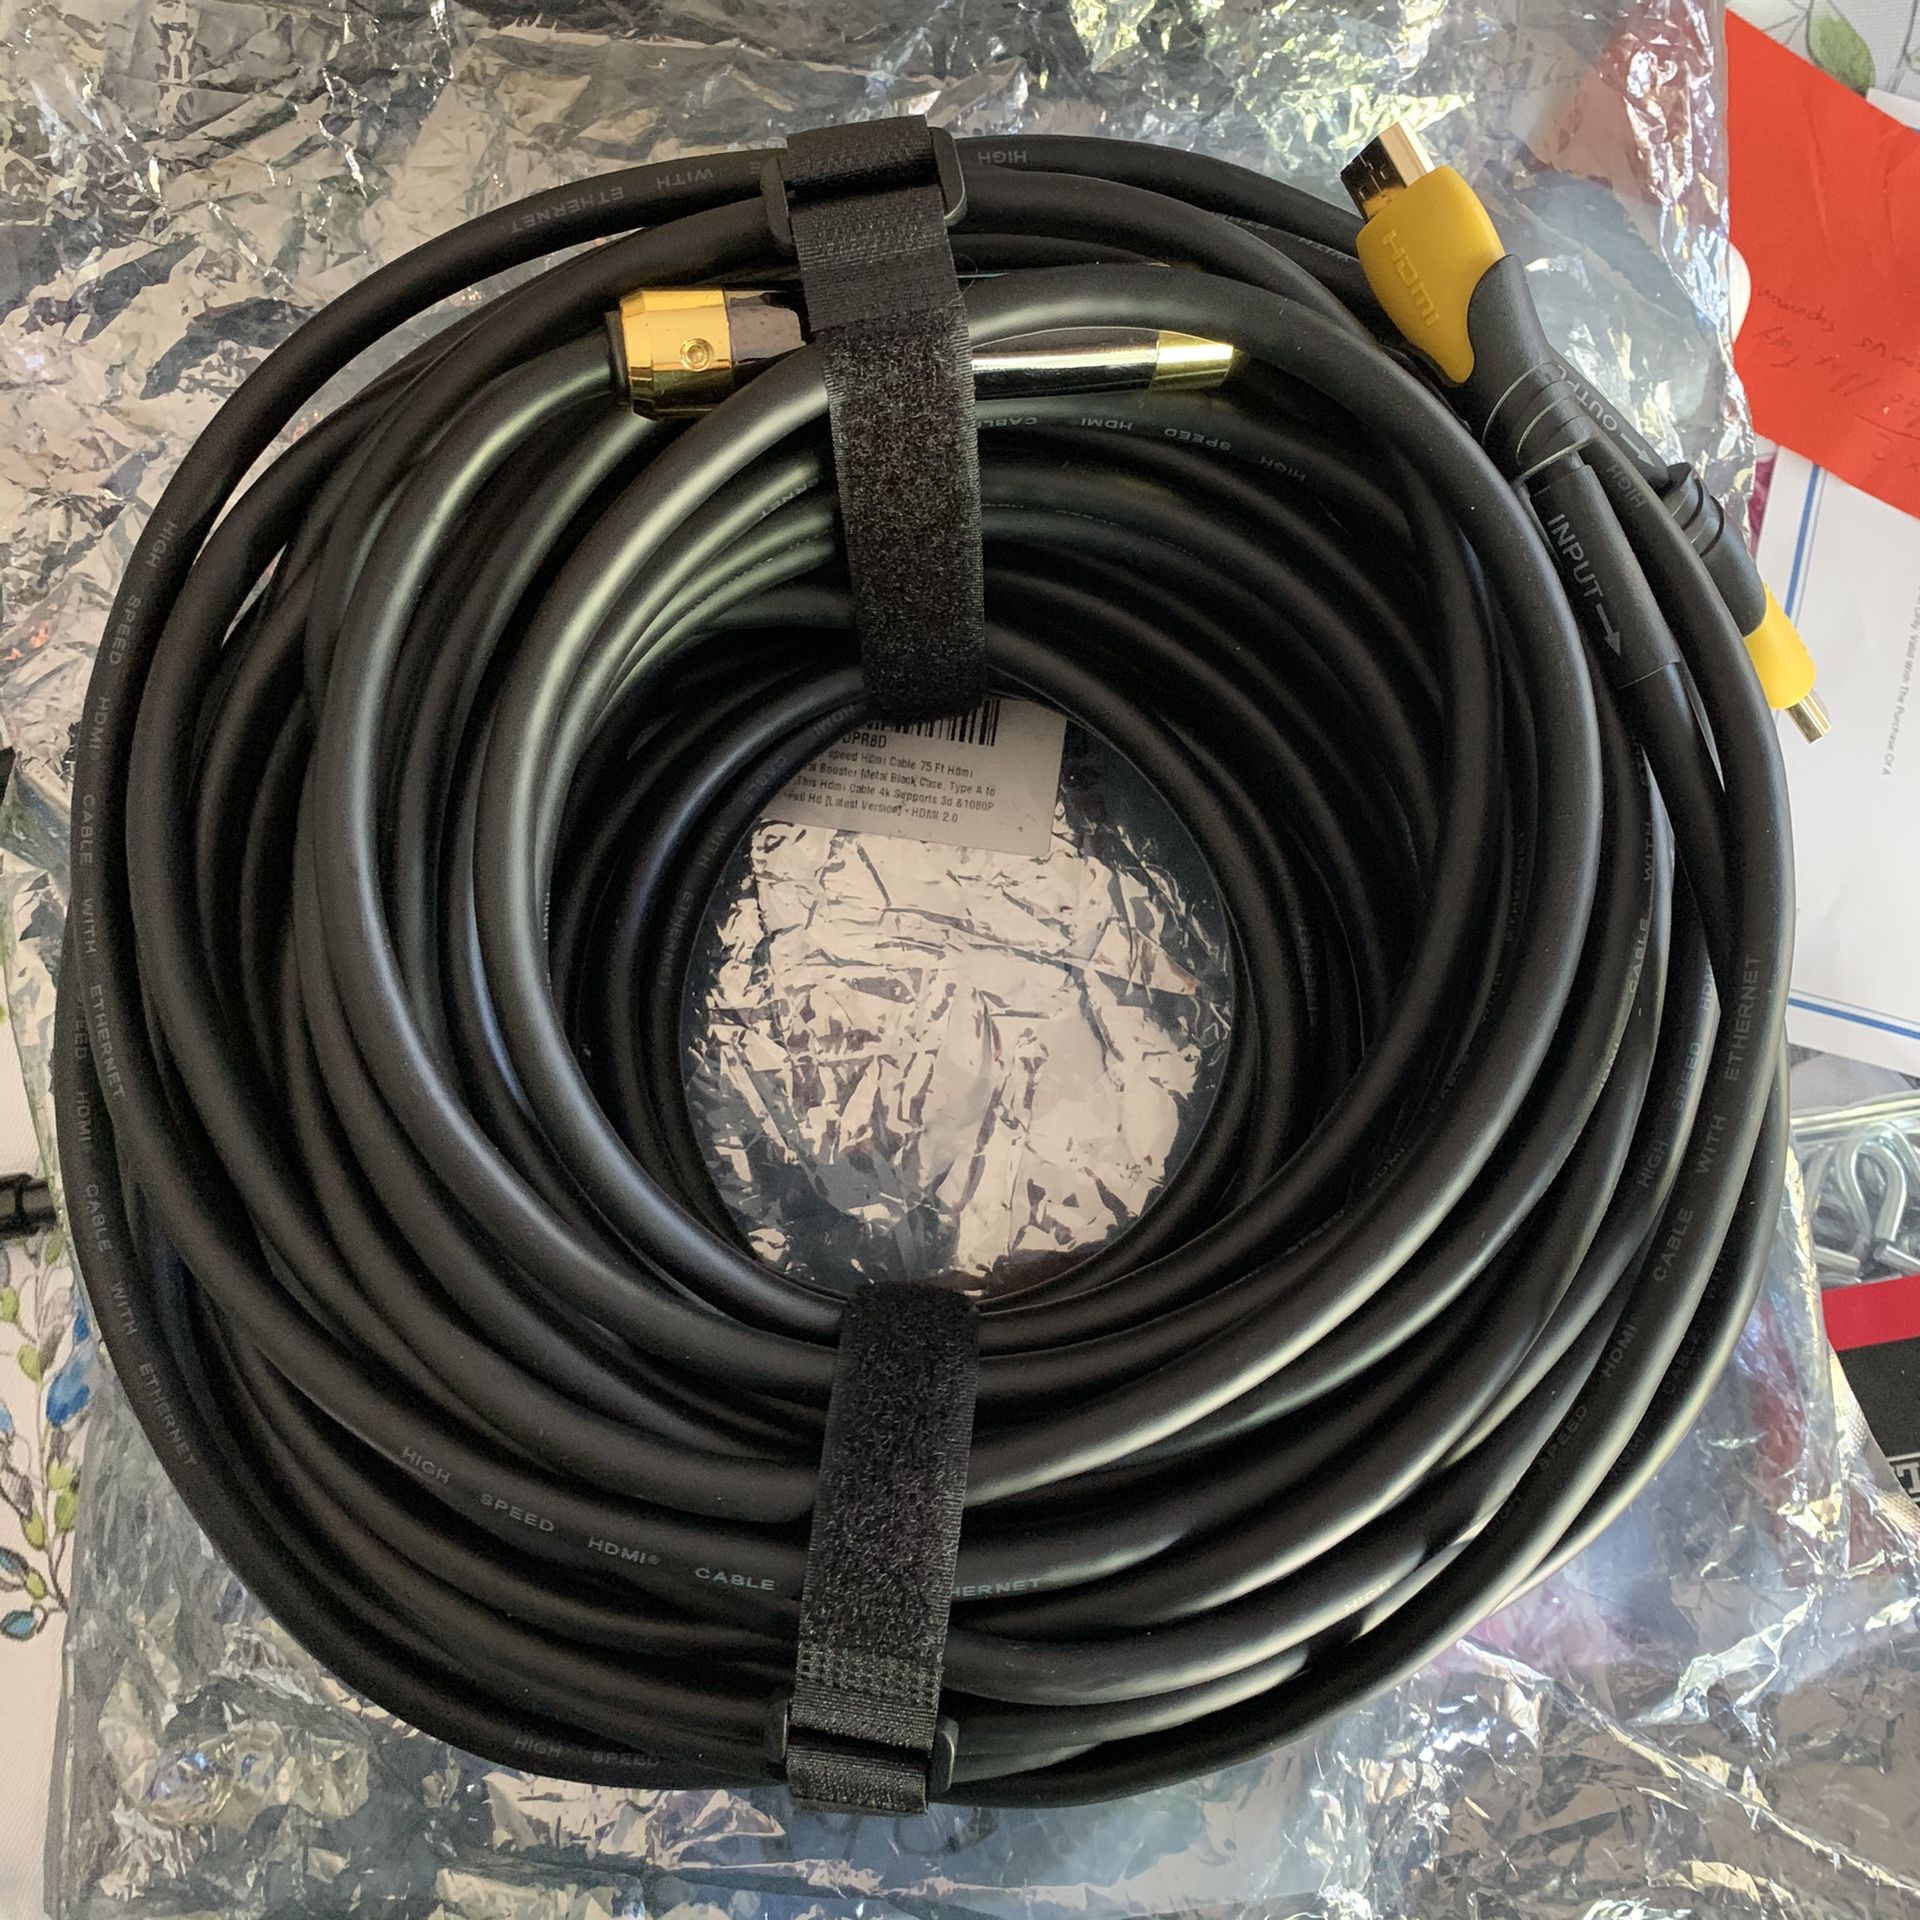 A-Tech 75 Foot HDMI Cable, 1080P support